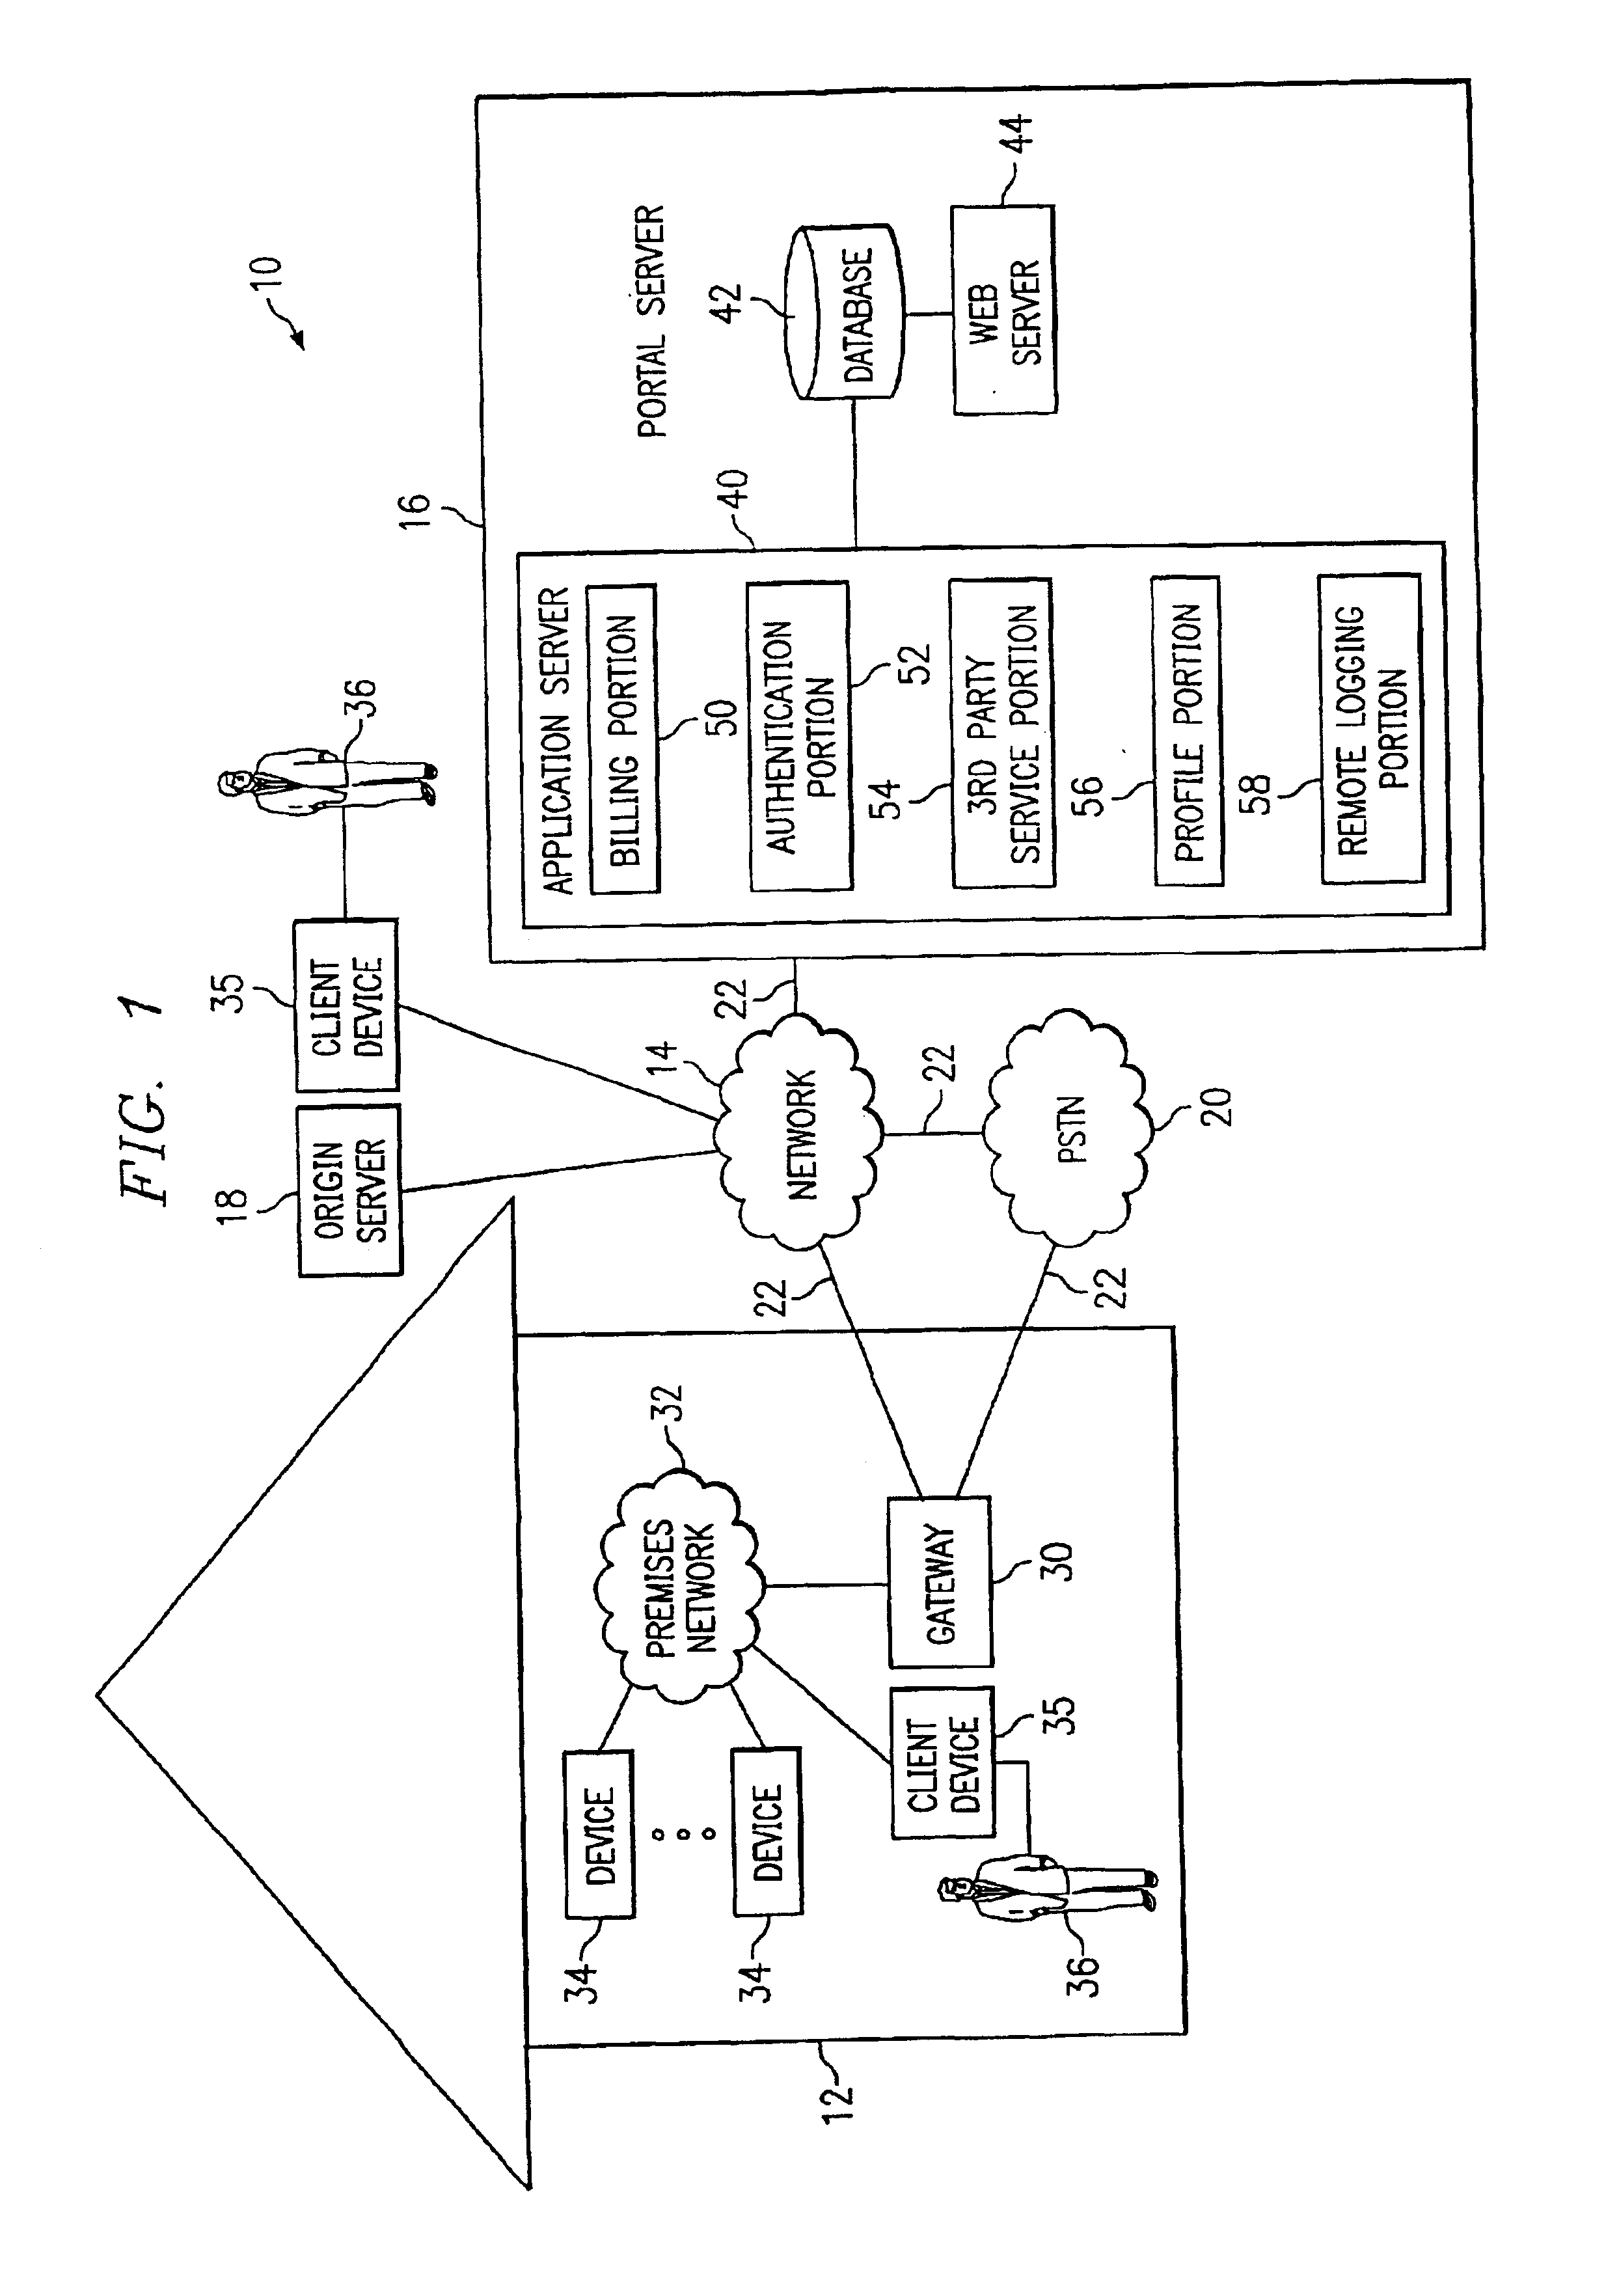 Method and system for partitioned service-enablement gateway with utility and consumer services